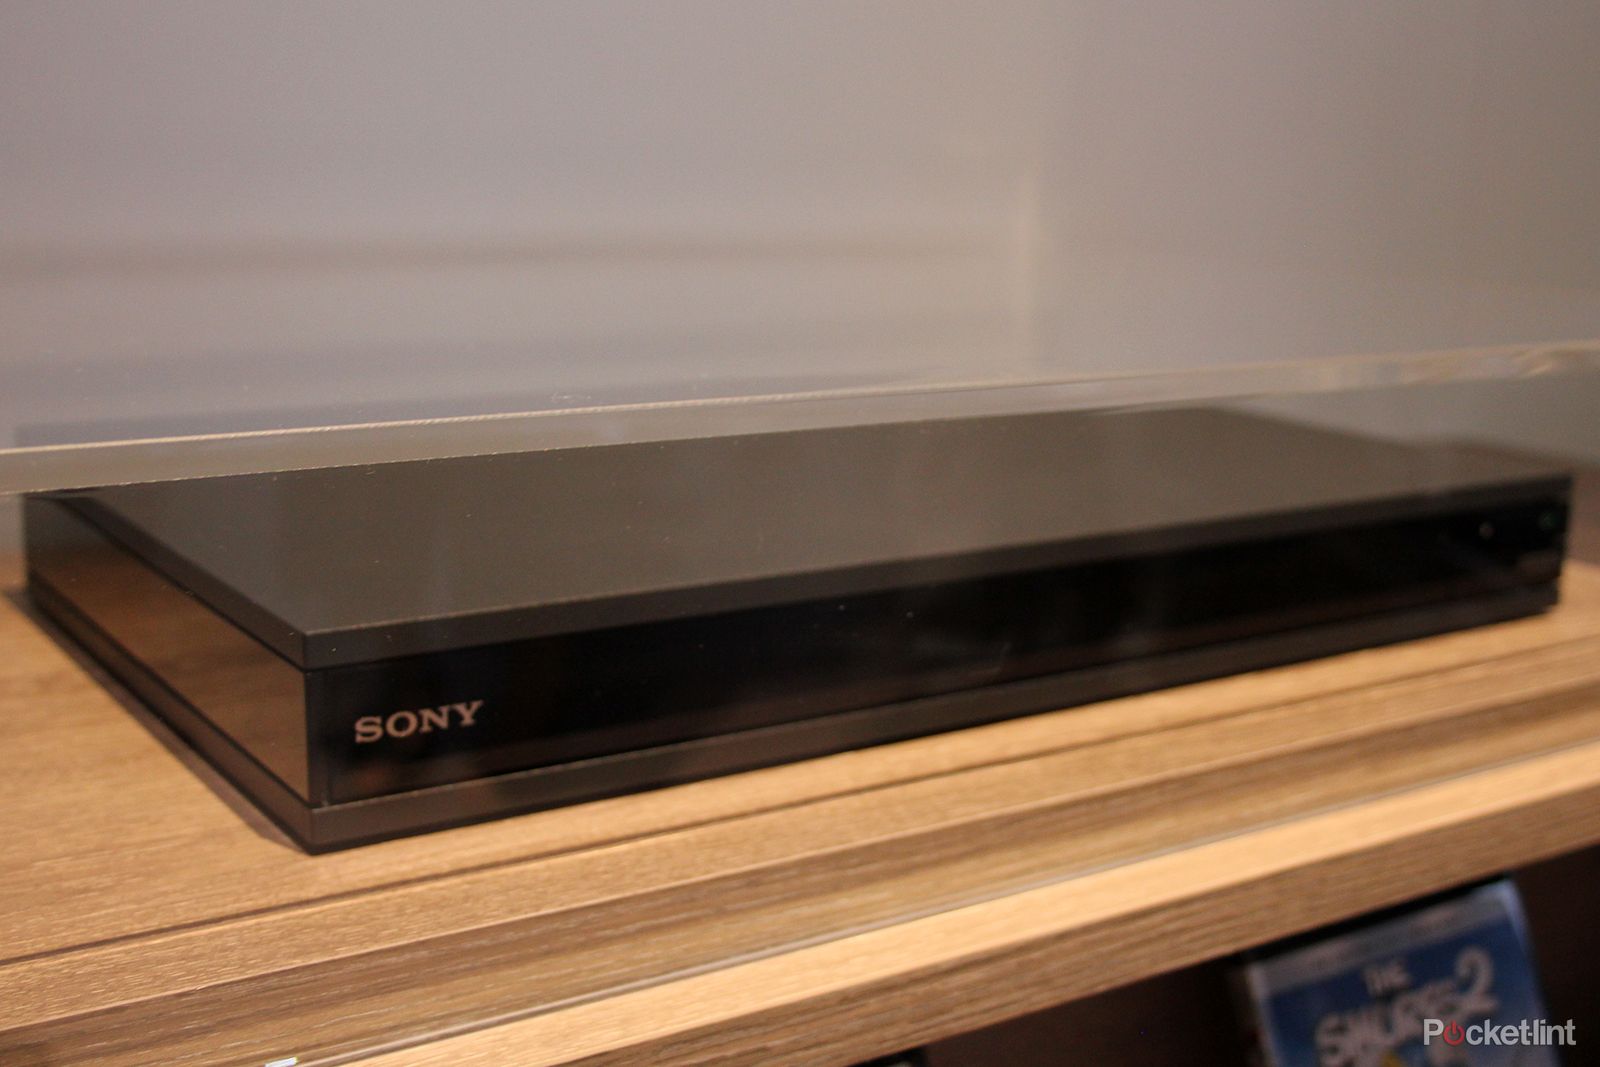 sony s first 4k ultra hd blu ray player not likely to appear until 2017 image 1